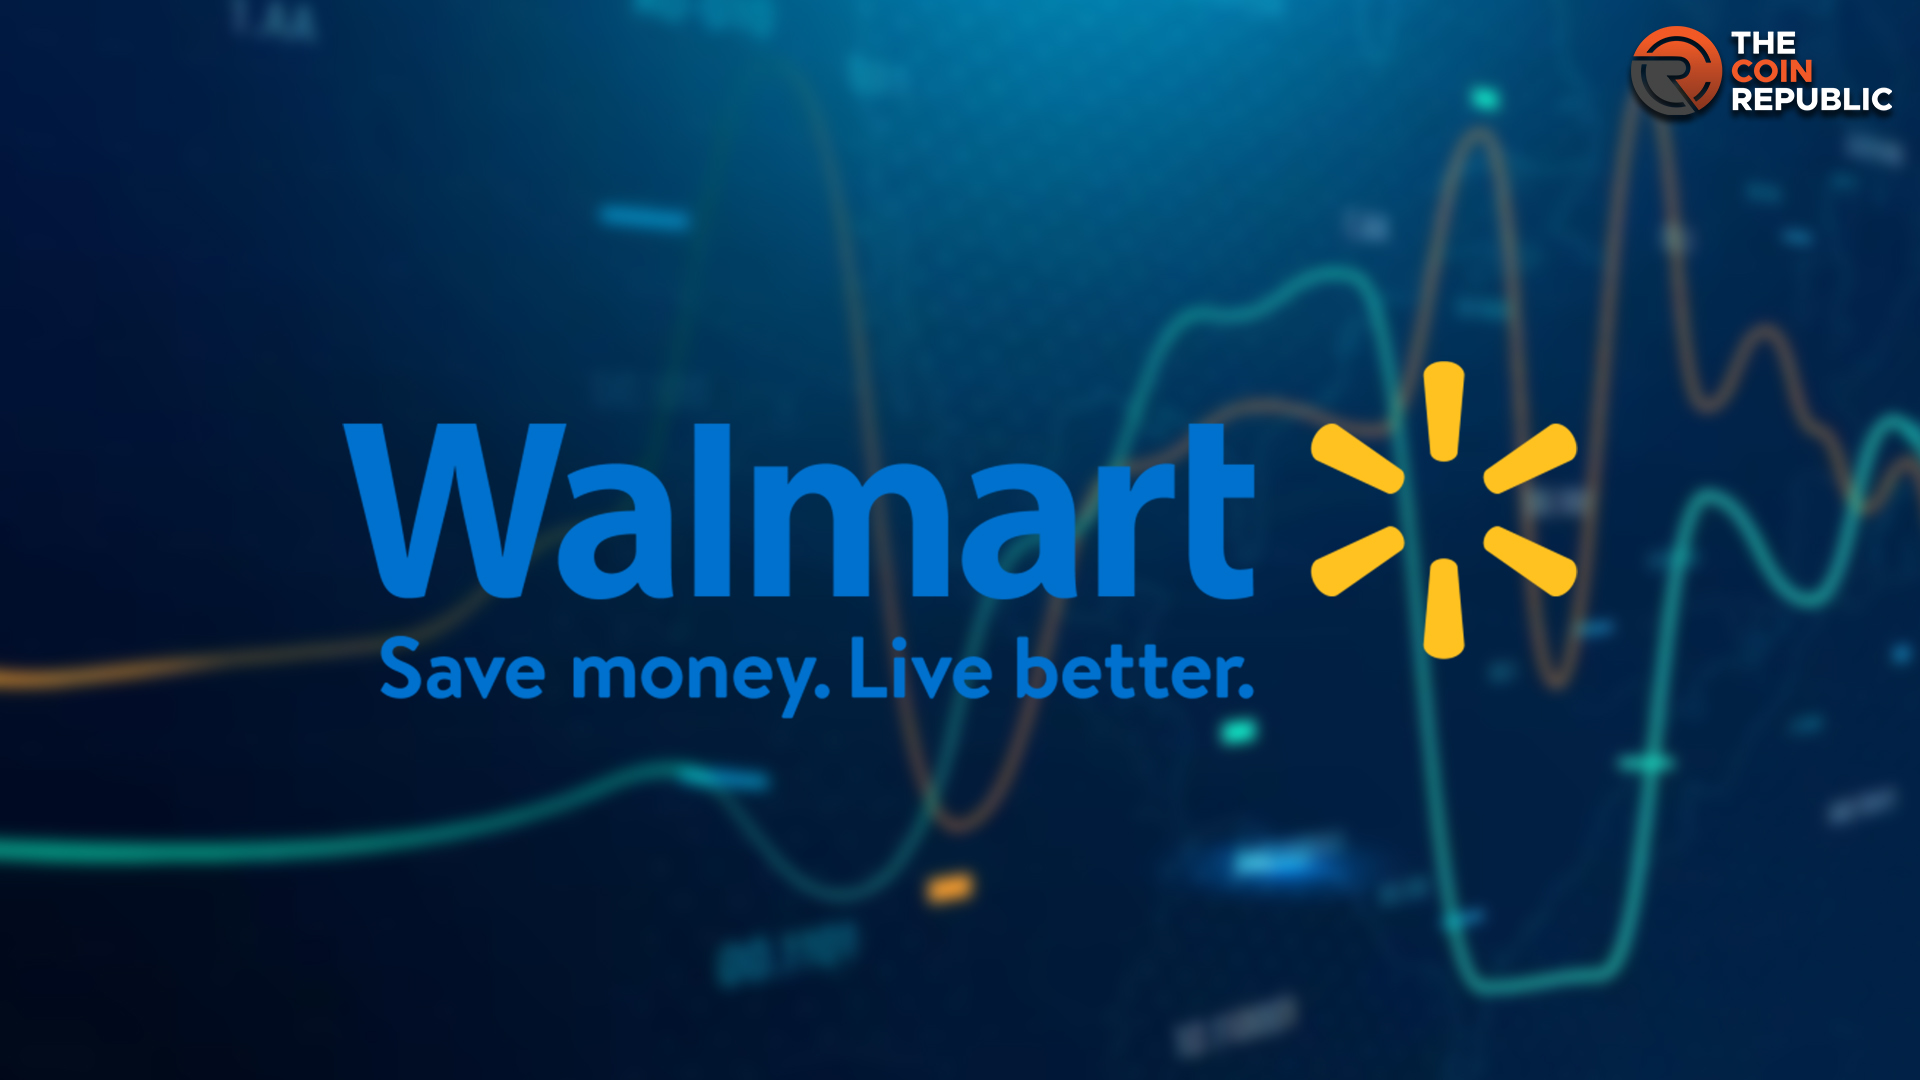 Walmart Stock Price Prediction: Can WMT Q2 Results Shoot $175?